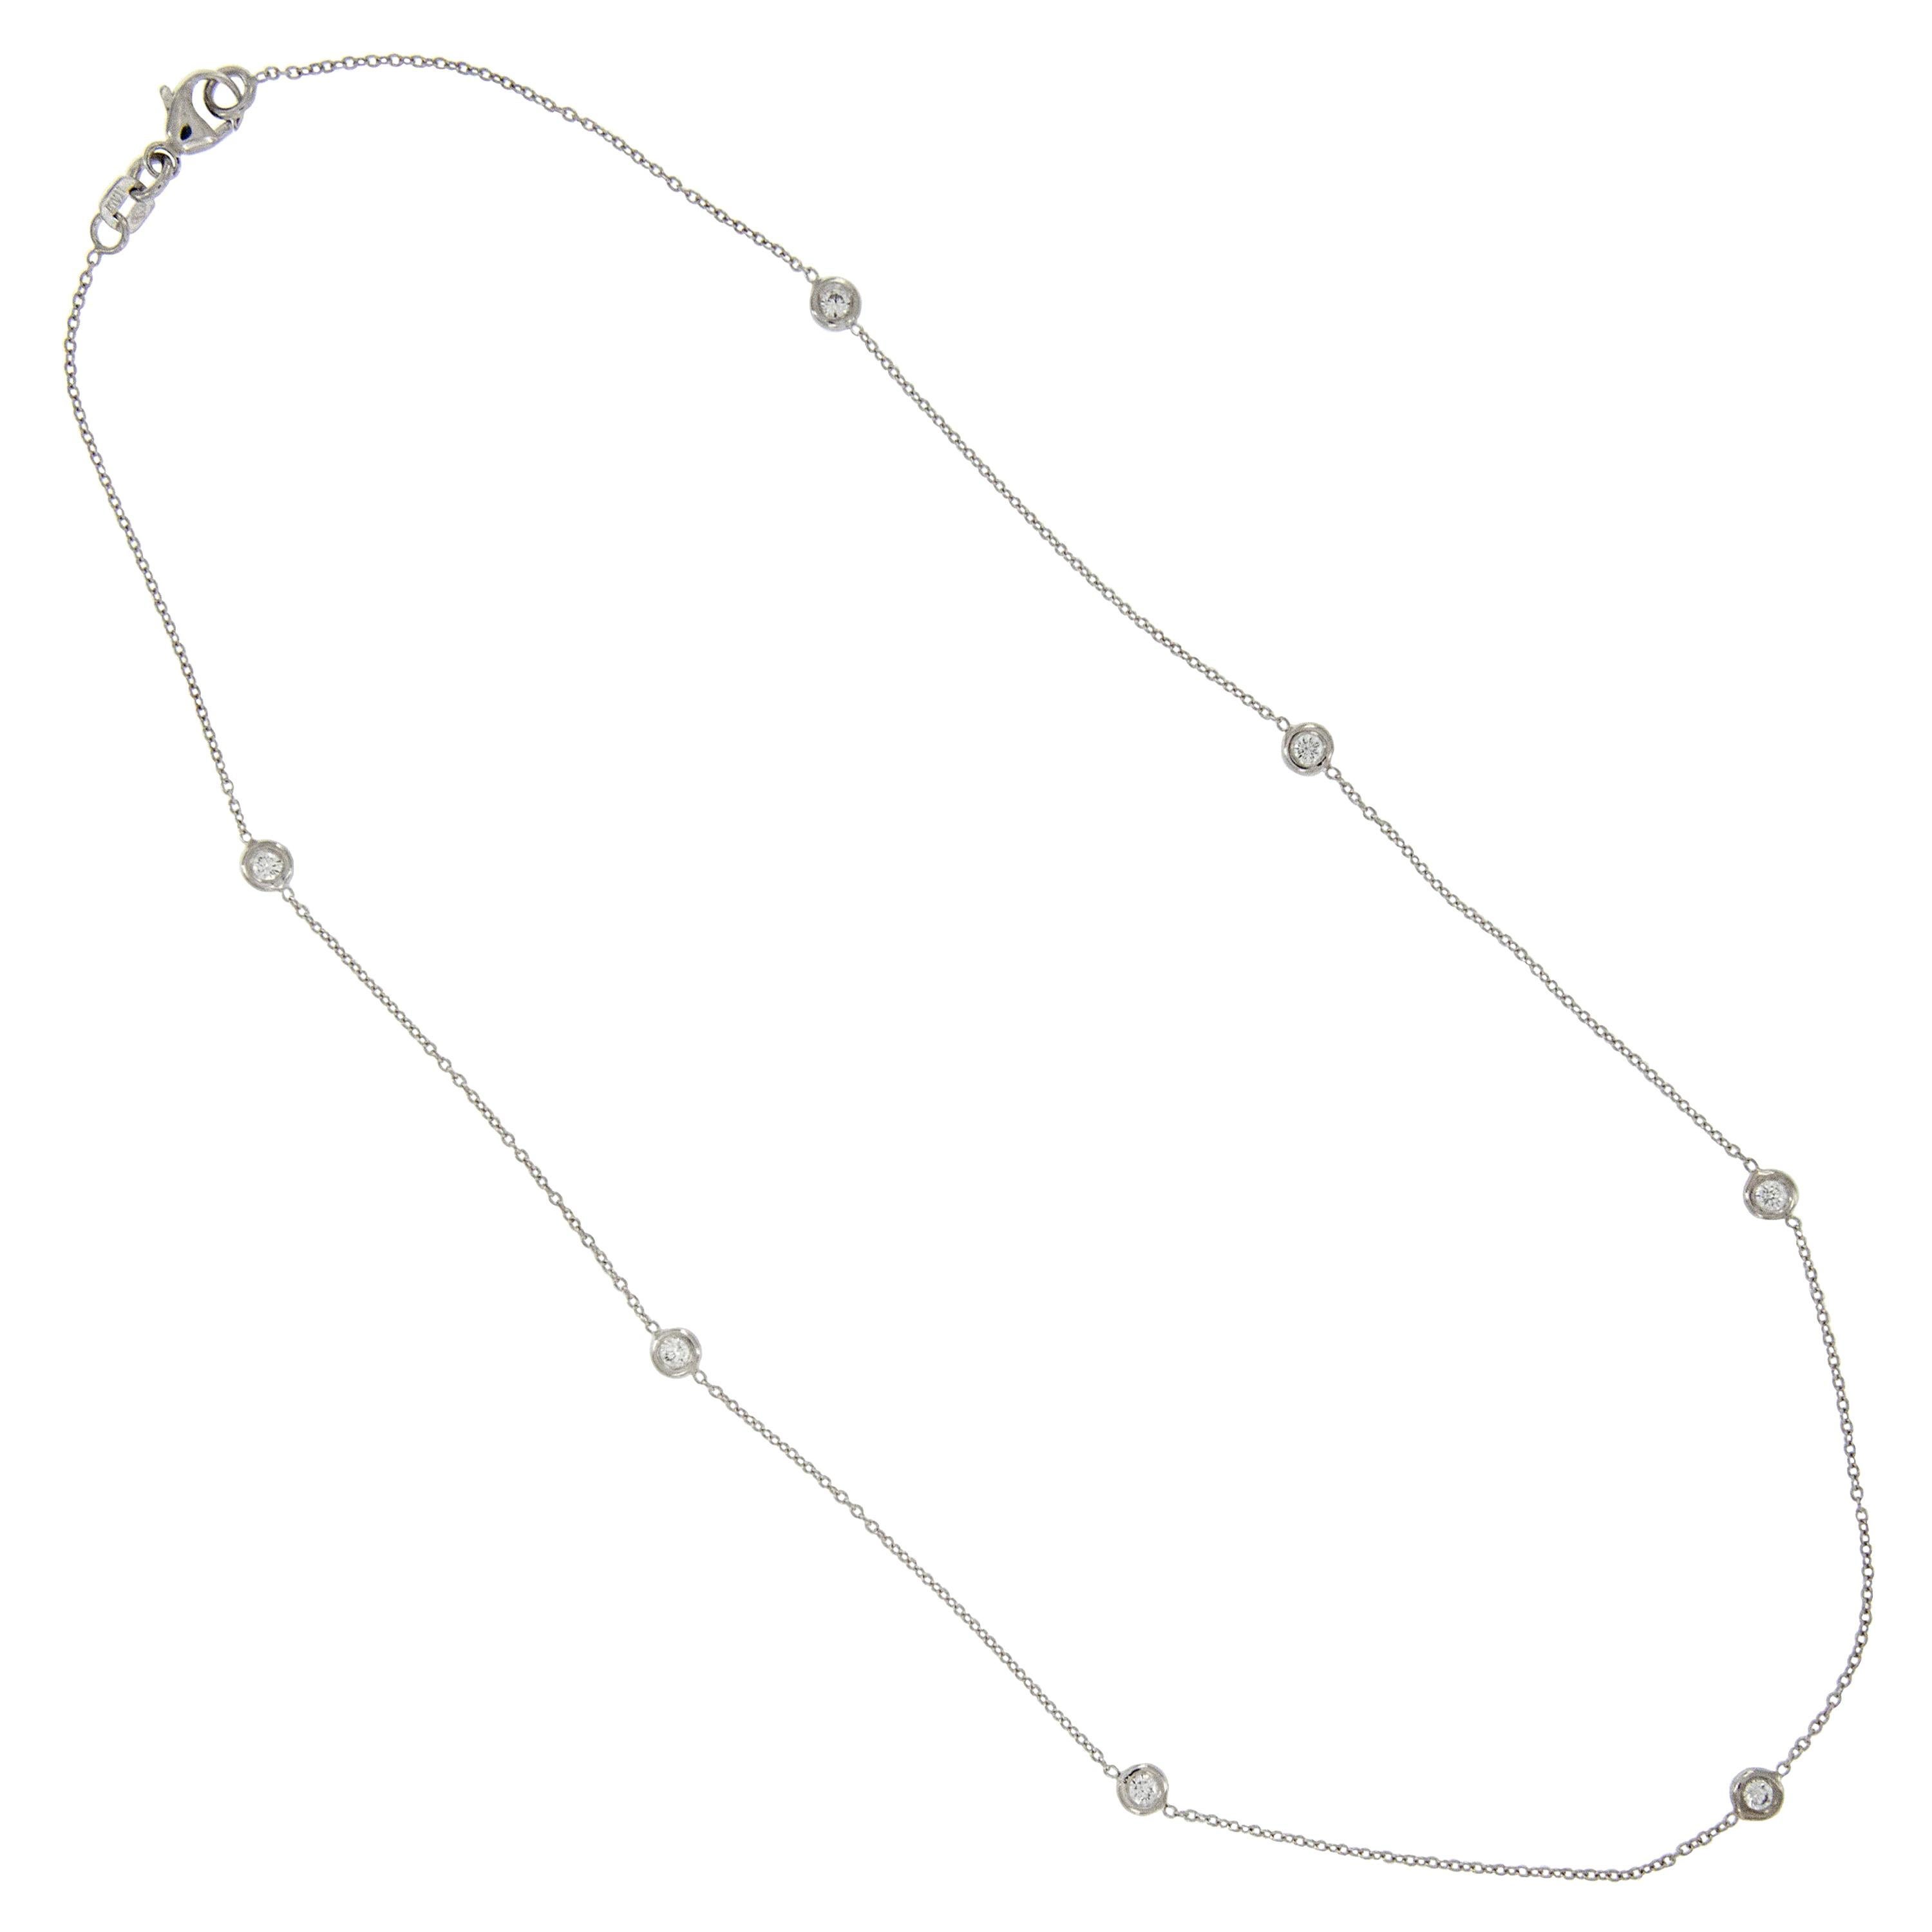 Platinum 0.70 Carat VS Clarity, F-G Color Diamonds by the Yard Station Necklace